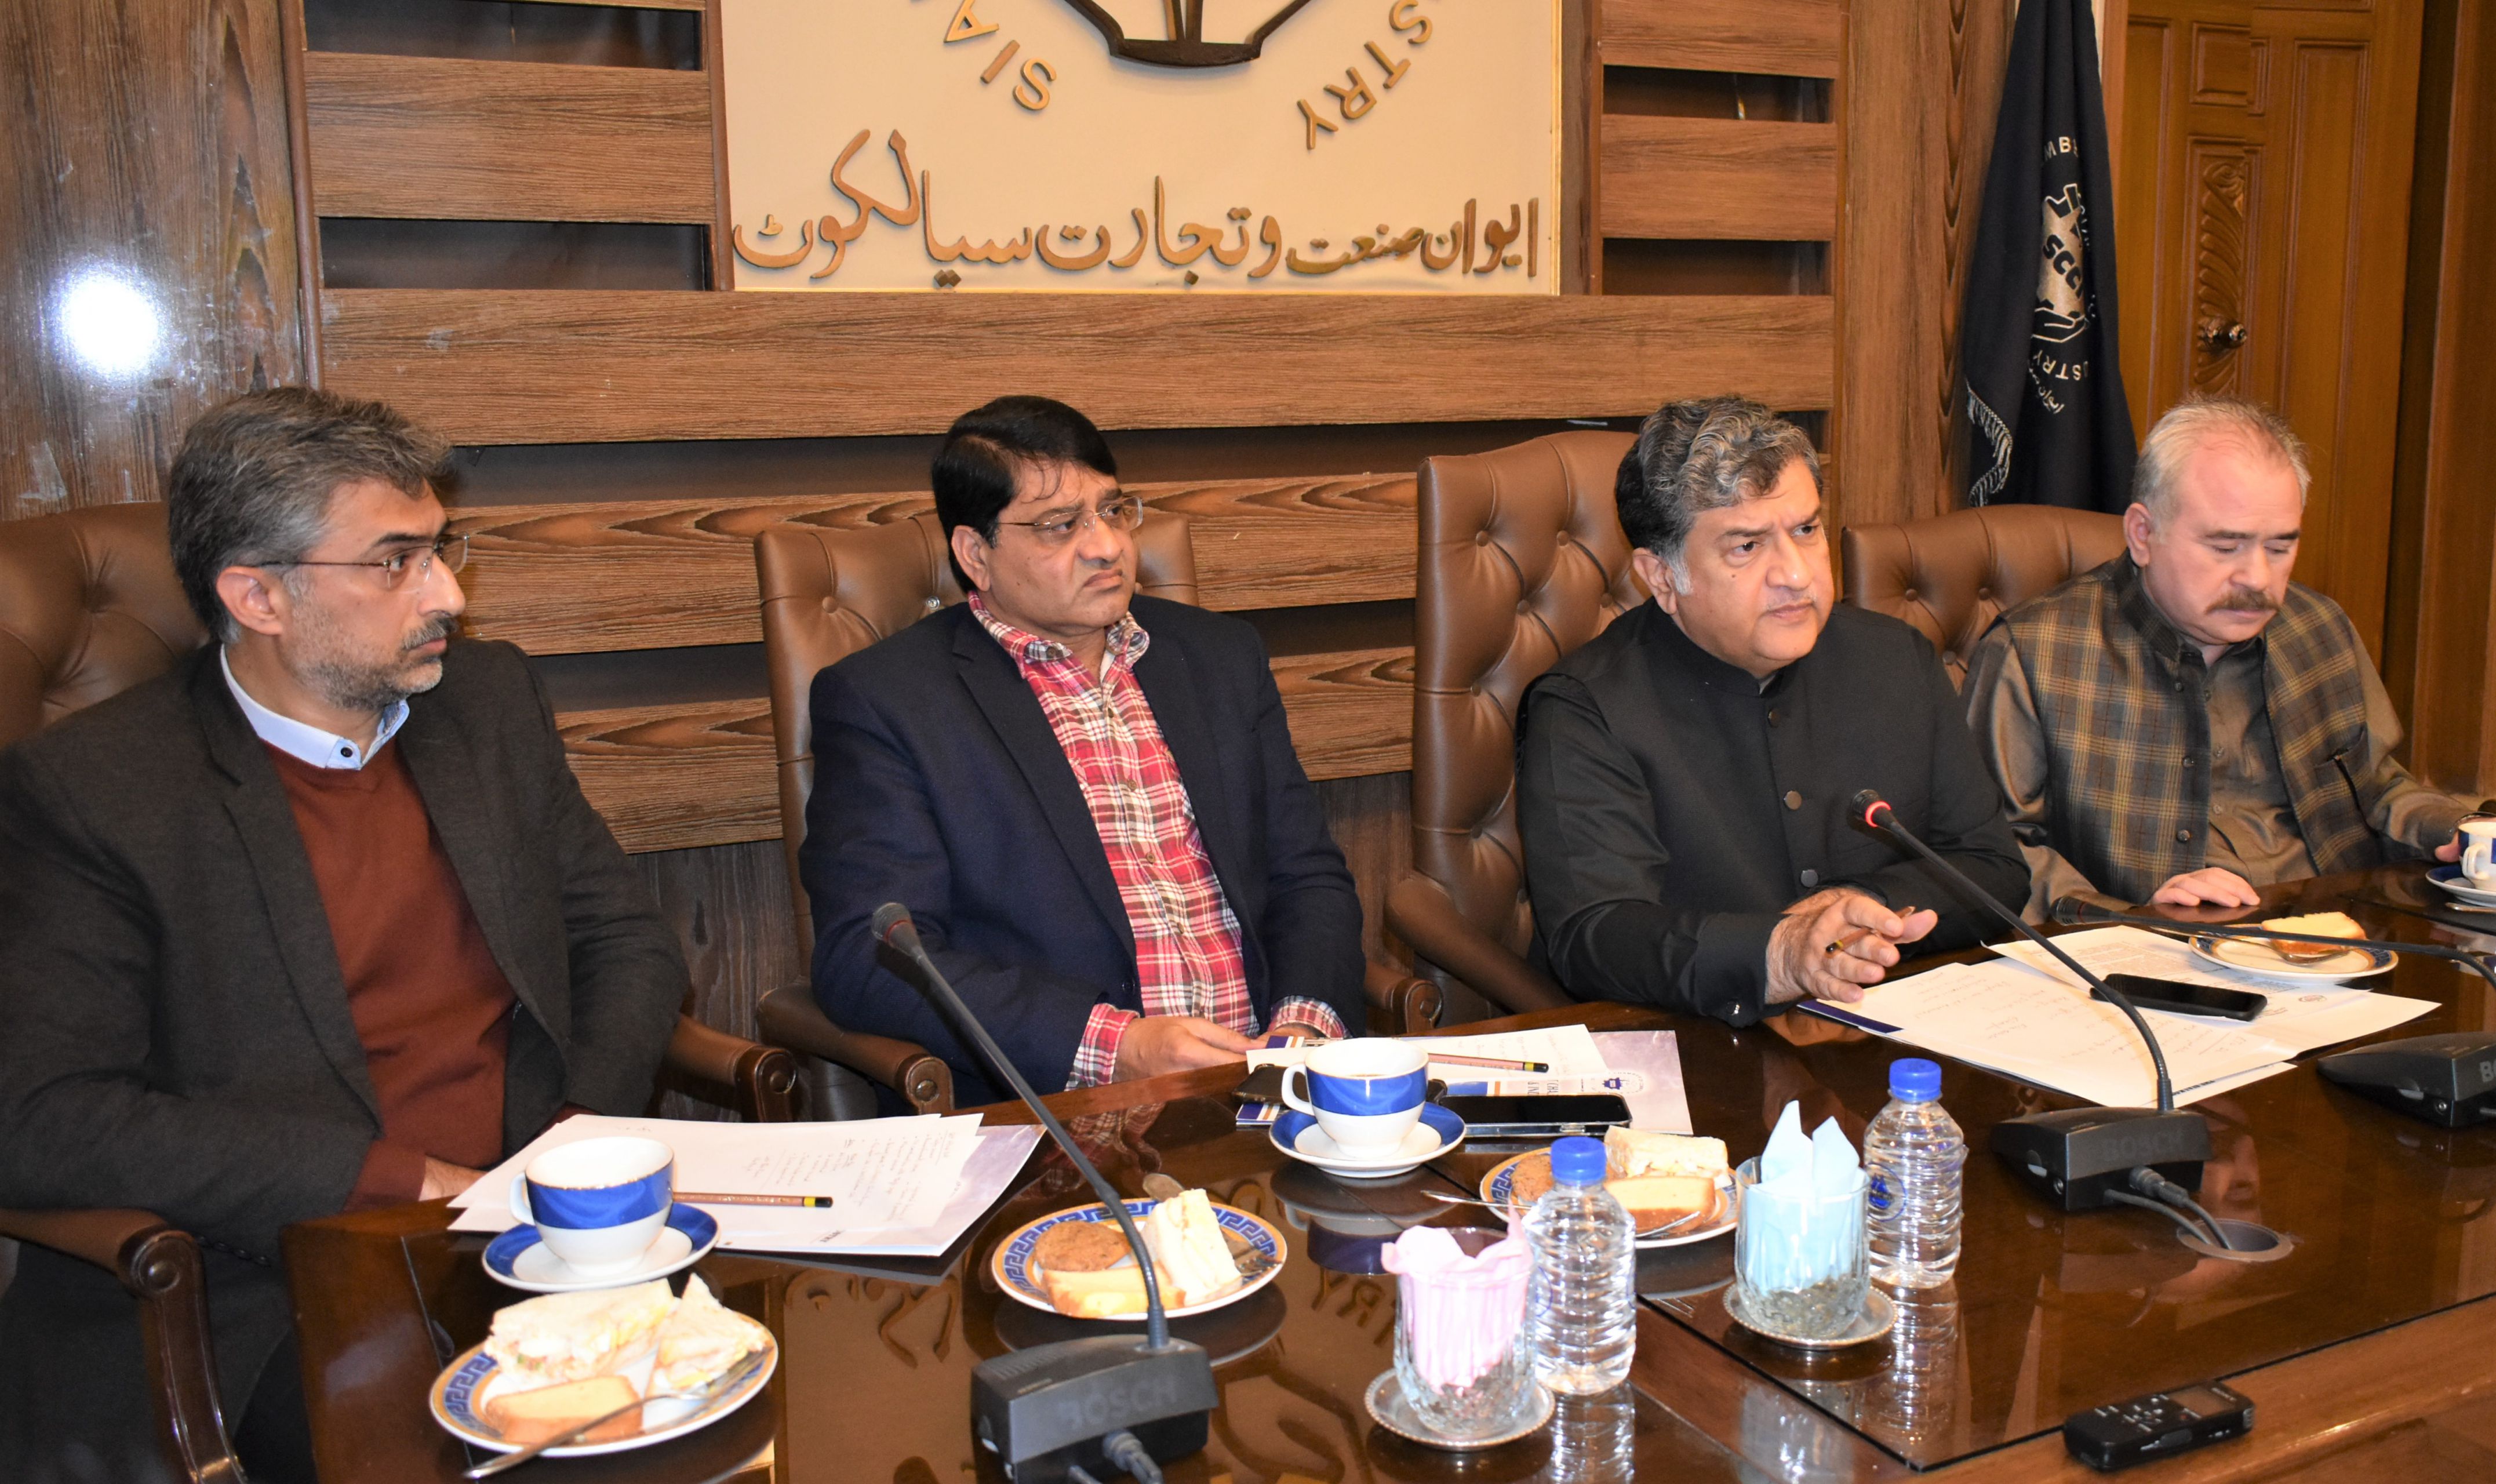 On December 17, 2021, Mian Imran Akbar, President, Sialkot Chamber of Commerce & Industry presided over Joint Meeting of Departmental Committees on TMA & Excise and Crime Watch & Traffic Management. President, SCCI highlighted some important issues regarding the Traffic management system of Sialkot and the hurdles in smooth flow of Traffic including wandering animals, illegal parking and non-registered Qingqi rickshaws driven by incompetent drivers across the city. Mr. Rana Nadeem, Chairman, Departmental Committee on TMA/Excise said that the Traffic Police of Sialkot and SCCI should collaborate in order to control the Traffic management in city. Mr. Rana Tariq Nadeem, DSP city Sialkot assured his full support in early resolution of these matters.